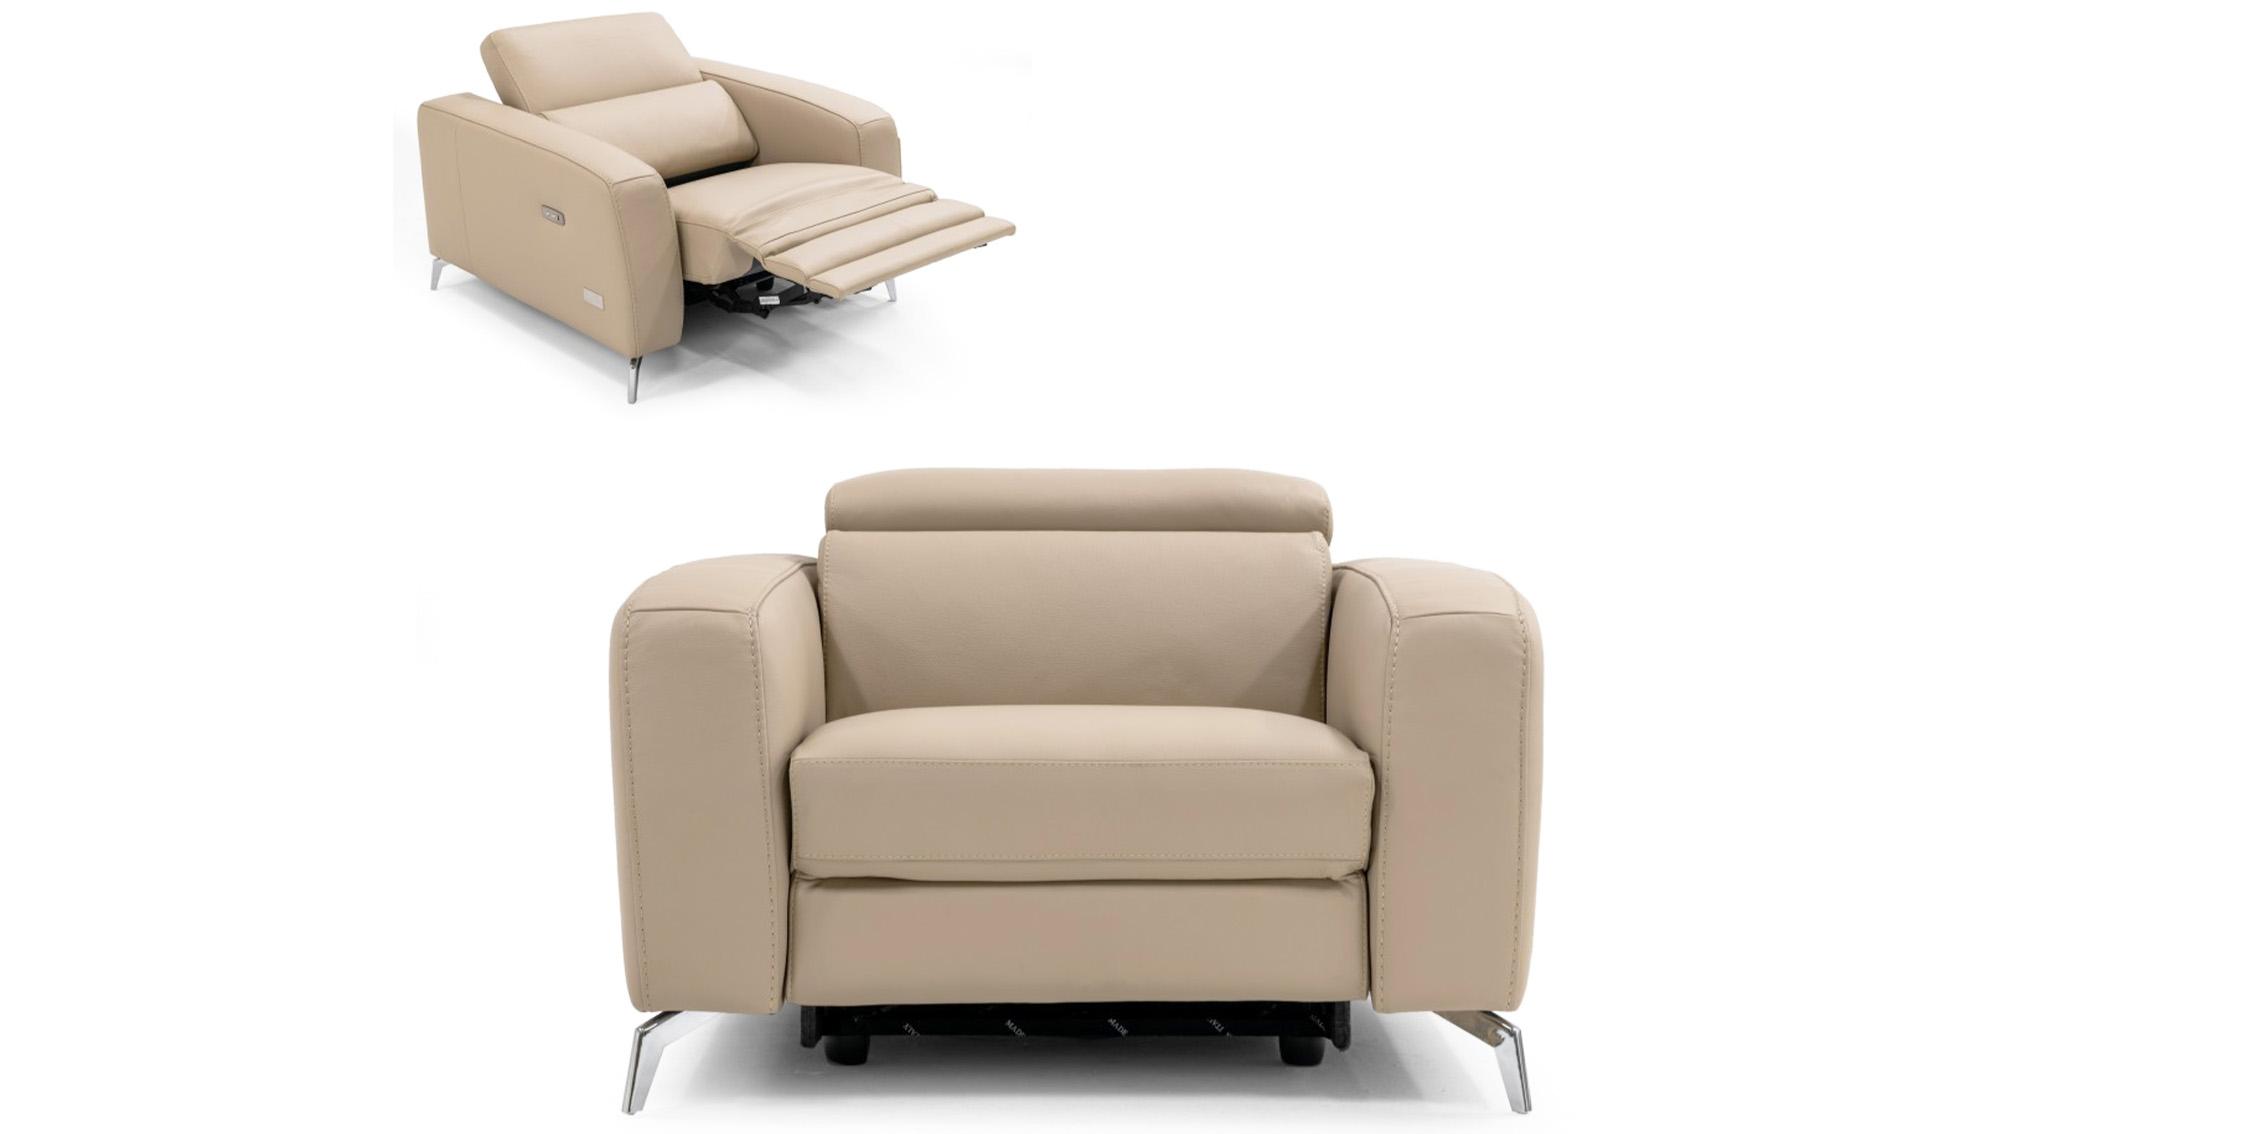 Contemporary, Modern Recliner Chair VGCCROMA-BEI-CH VGCCROMA-BEI-CH in Tan Italian Leather